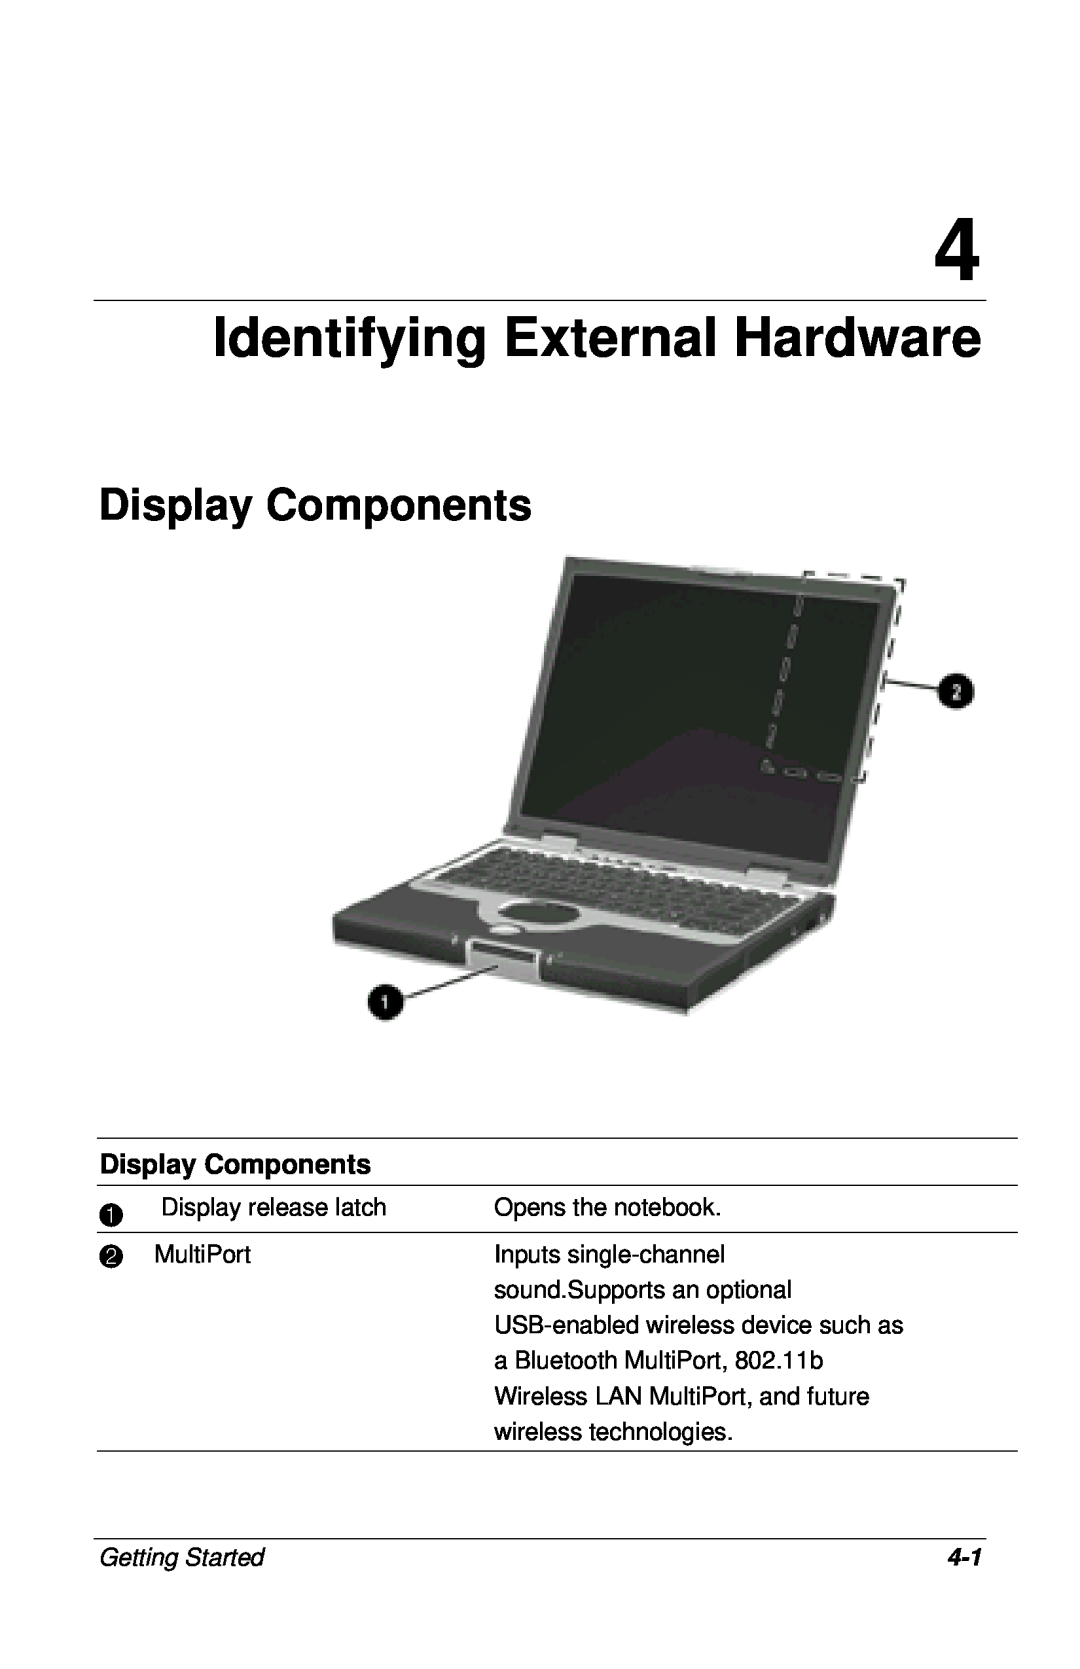 HP 910AP, 955AP, 950AP, 943AP, 945AP, 940AP, 935AP, 927AP, 930AP, 925EA, 923AP Identifying External Hardware, Display Components 